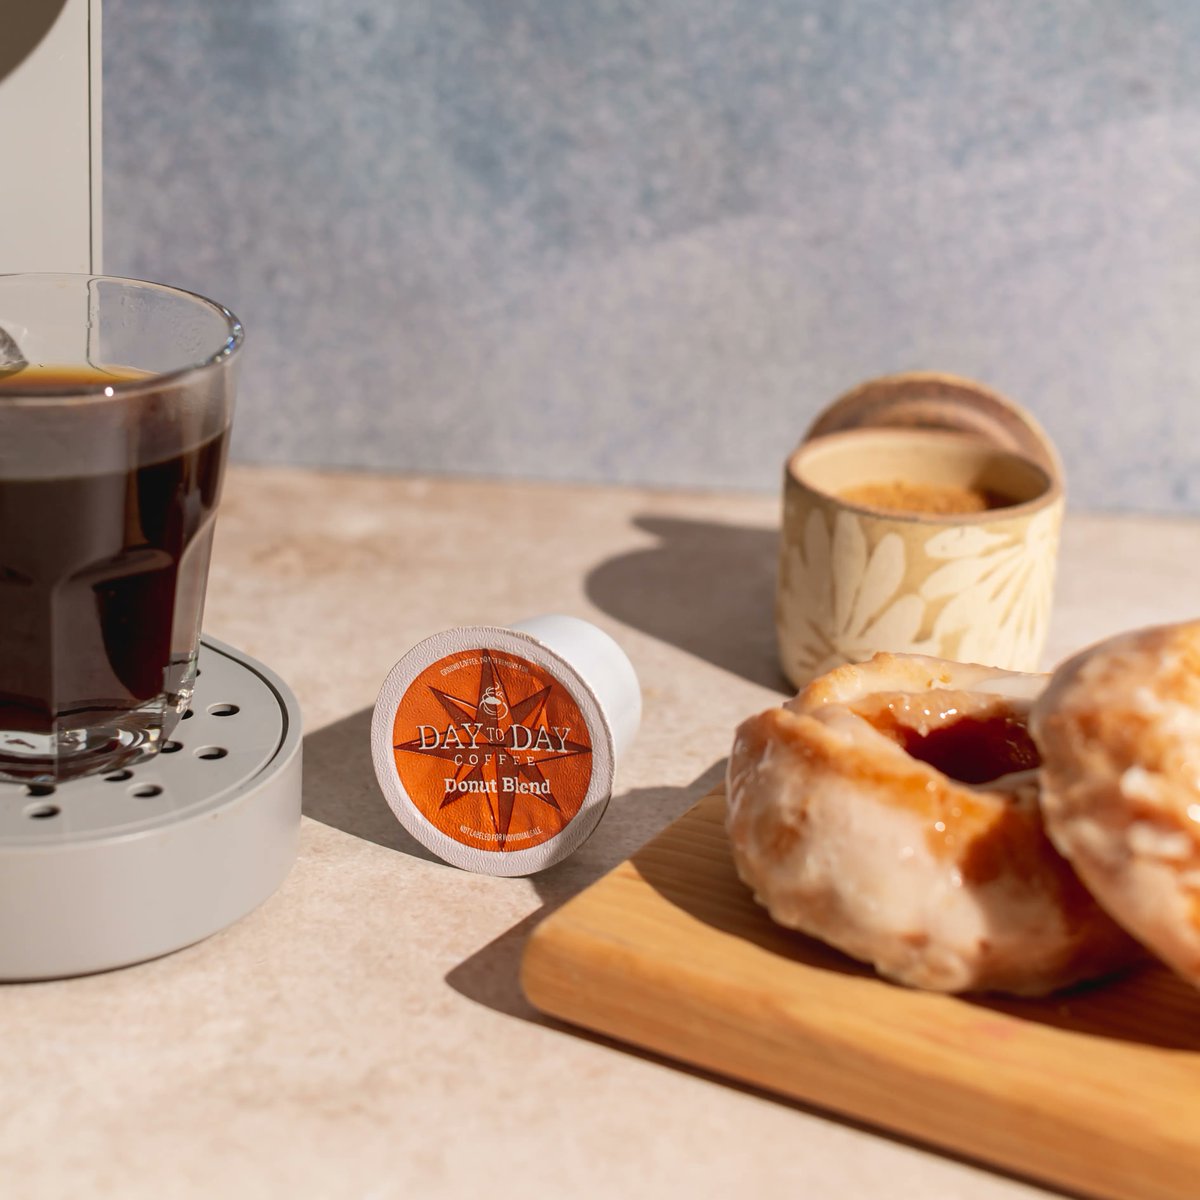 Unlock the magic of a perfect cup of coffee, any time, anywhere. With our coffee pods your coffee cravings will always find satisfaction. 🤎 

#DaytoDayCoffee #donutblend #coffeepods